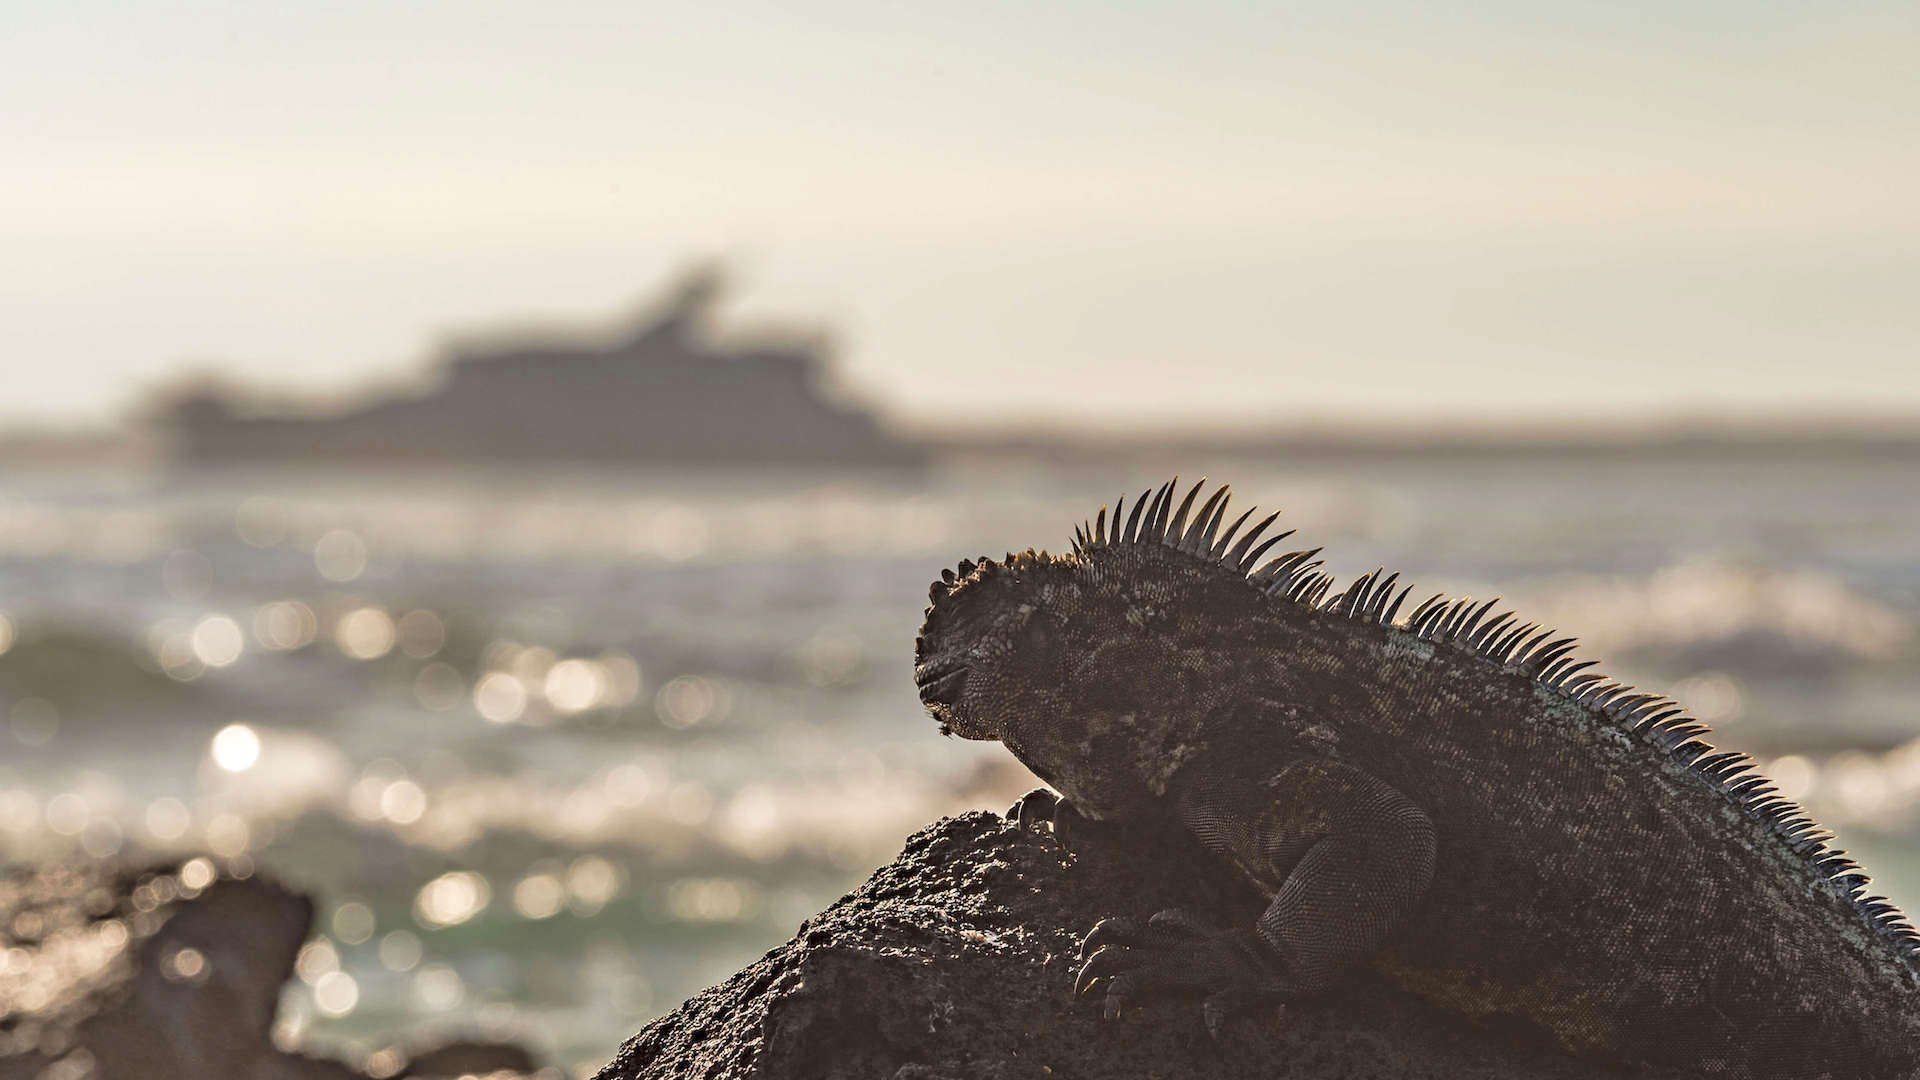 An Expedition Cruise To Galapagos